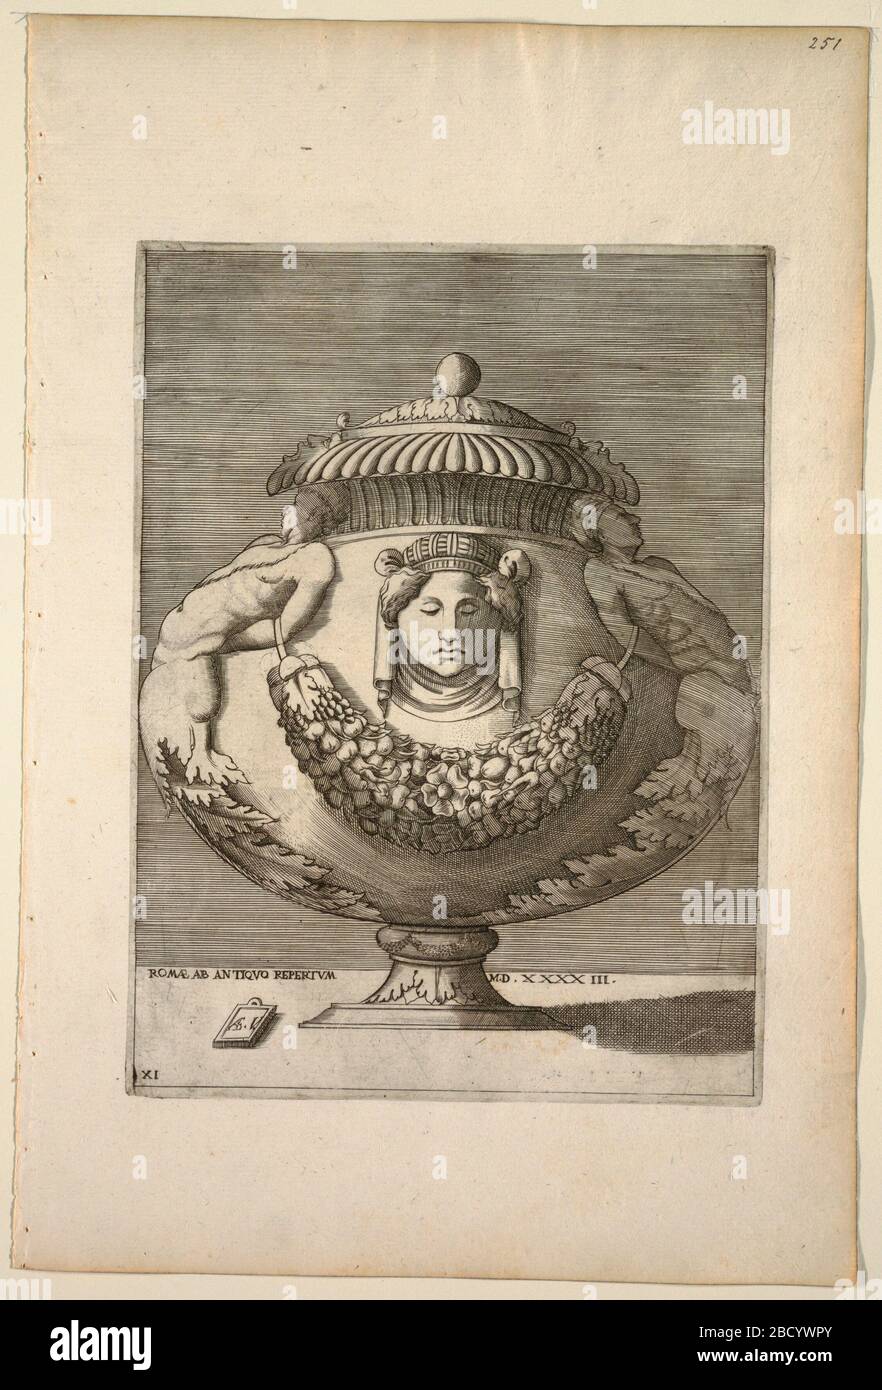 Vase Decorated with Figures Rinceaux and Festoons. Research in ProgressVertical rectangle. Covered vase with bulbous body rests upon pedestal base. A ball finial, gadrooning and fluting are at top. Vase Decorated with Figures Rinceaux and Festoons Stock Photo